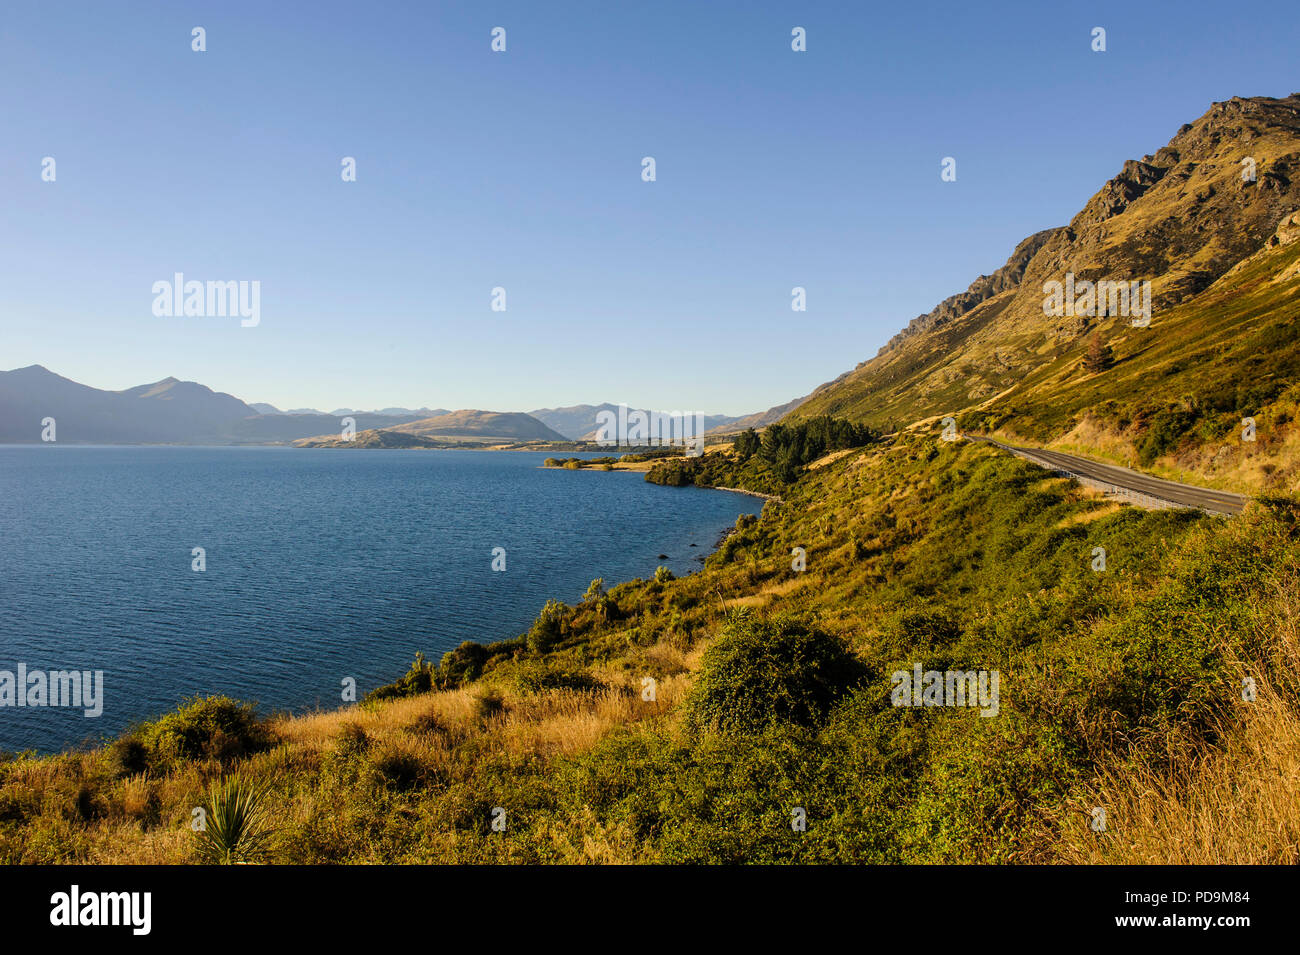 The shores of lake Wakatipu, Queenstown, South Island, New Zealand Stock Photo